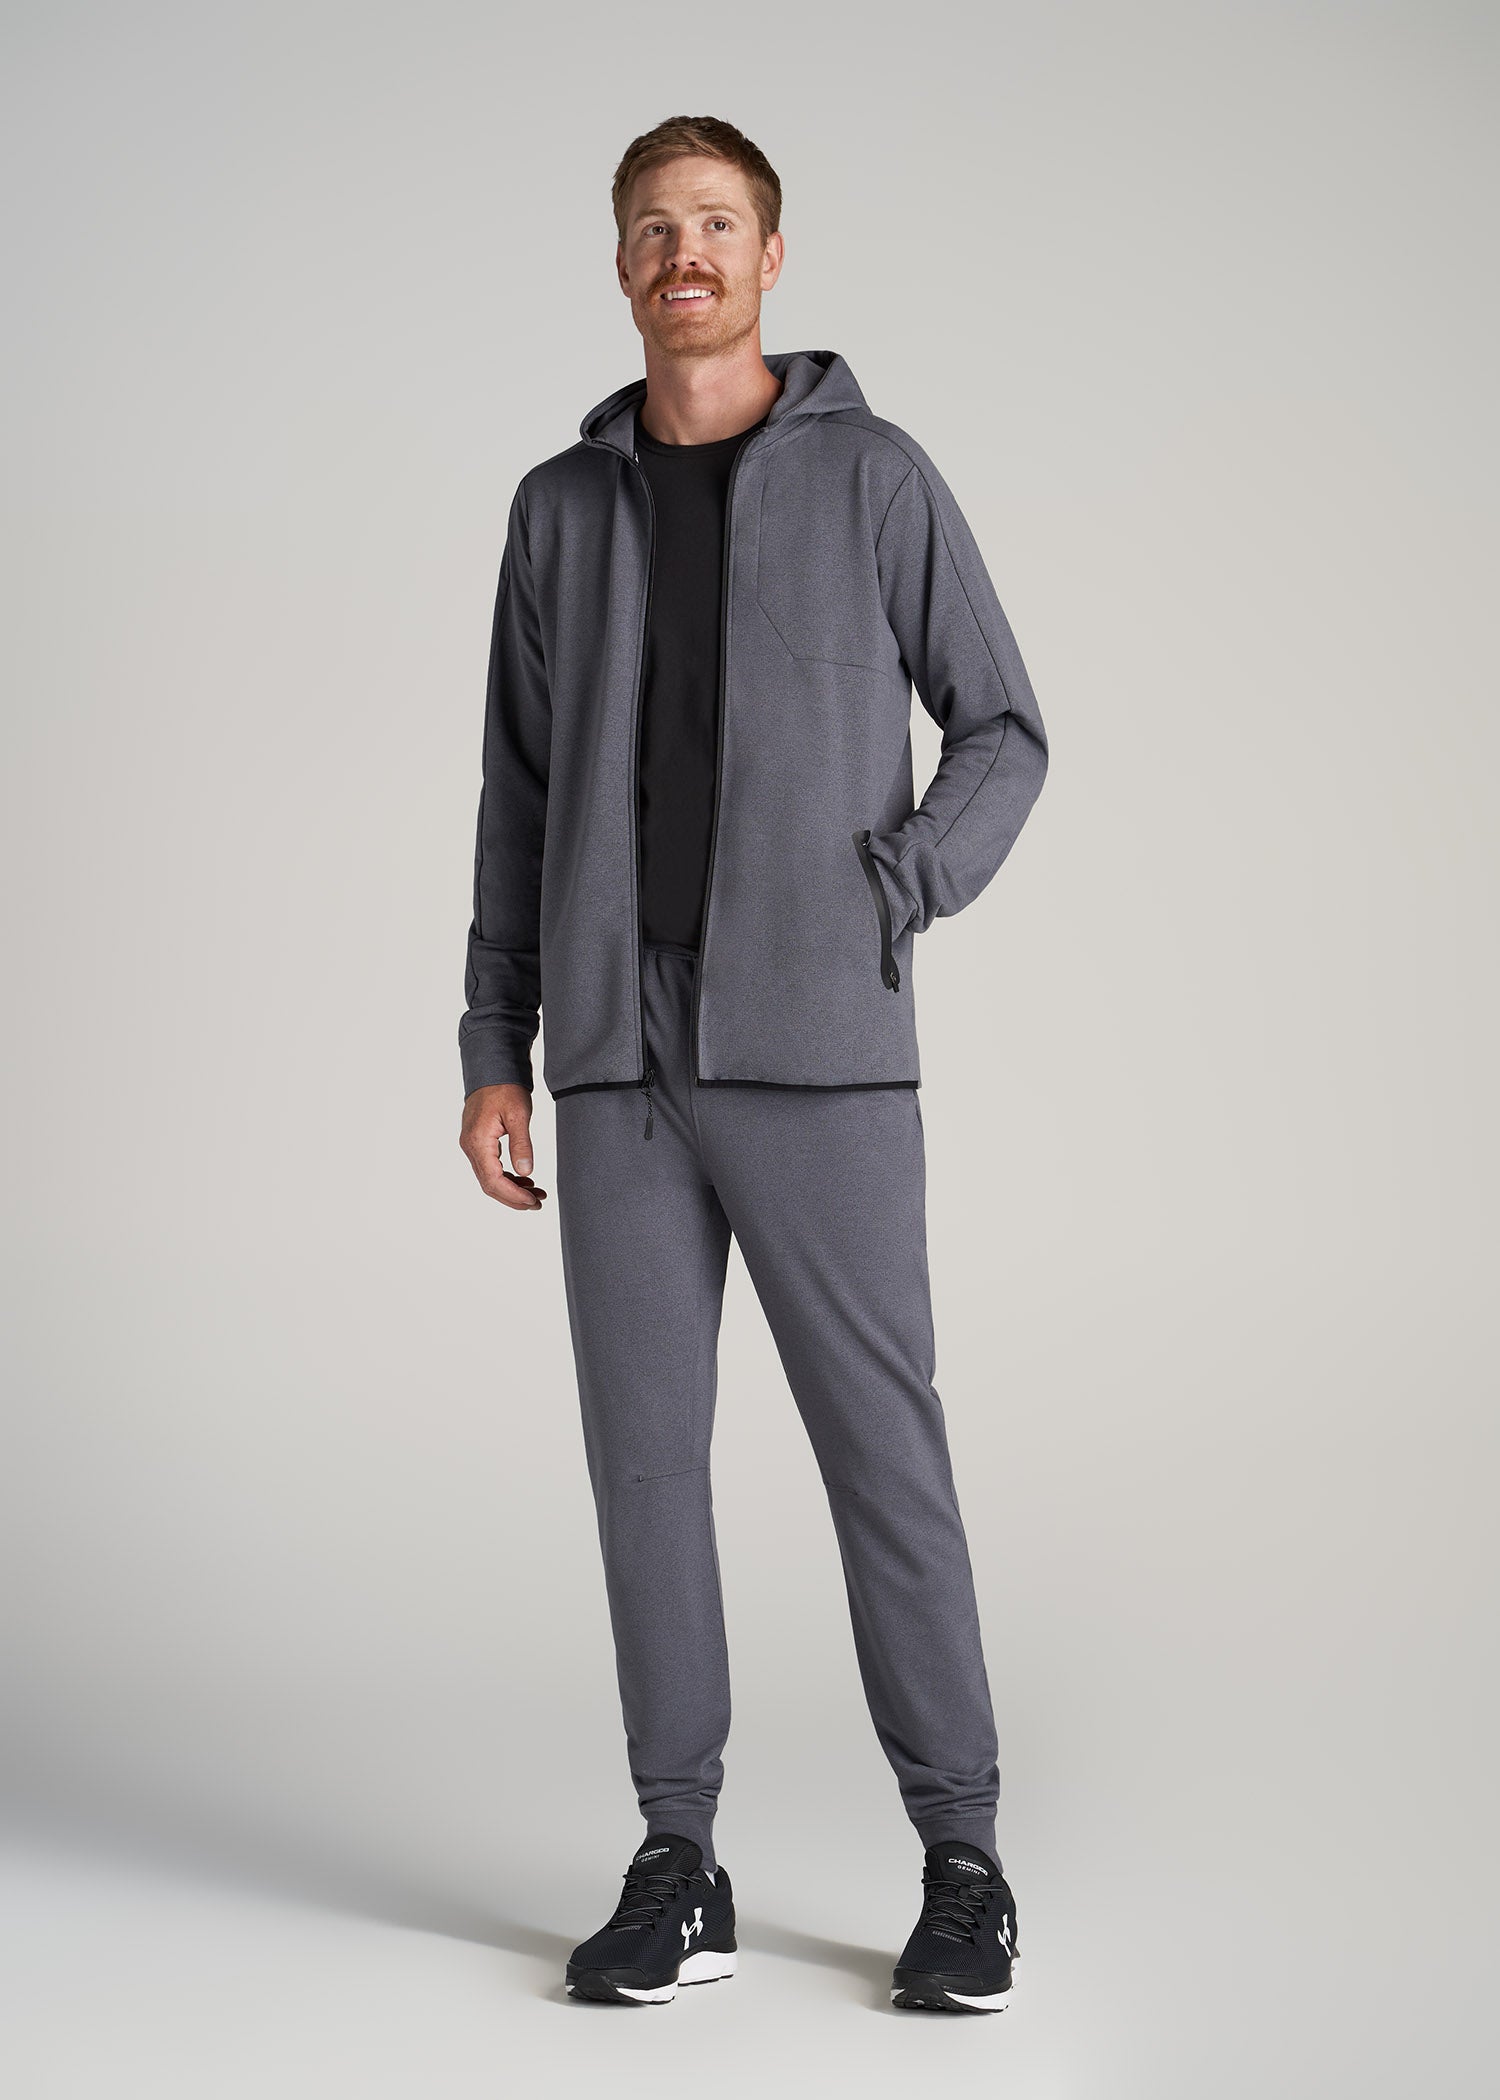 Wearever French Terry Full-Zip Men's Tall Hoodie in Charcoal Mix